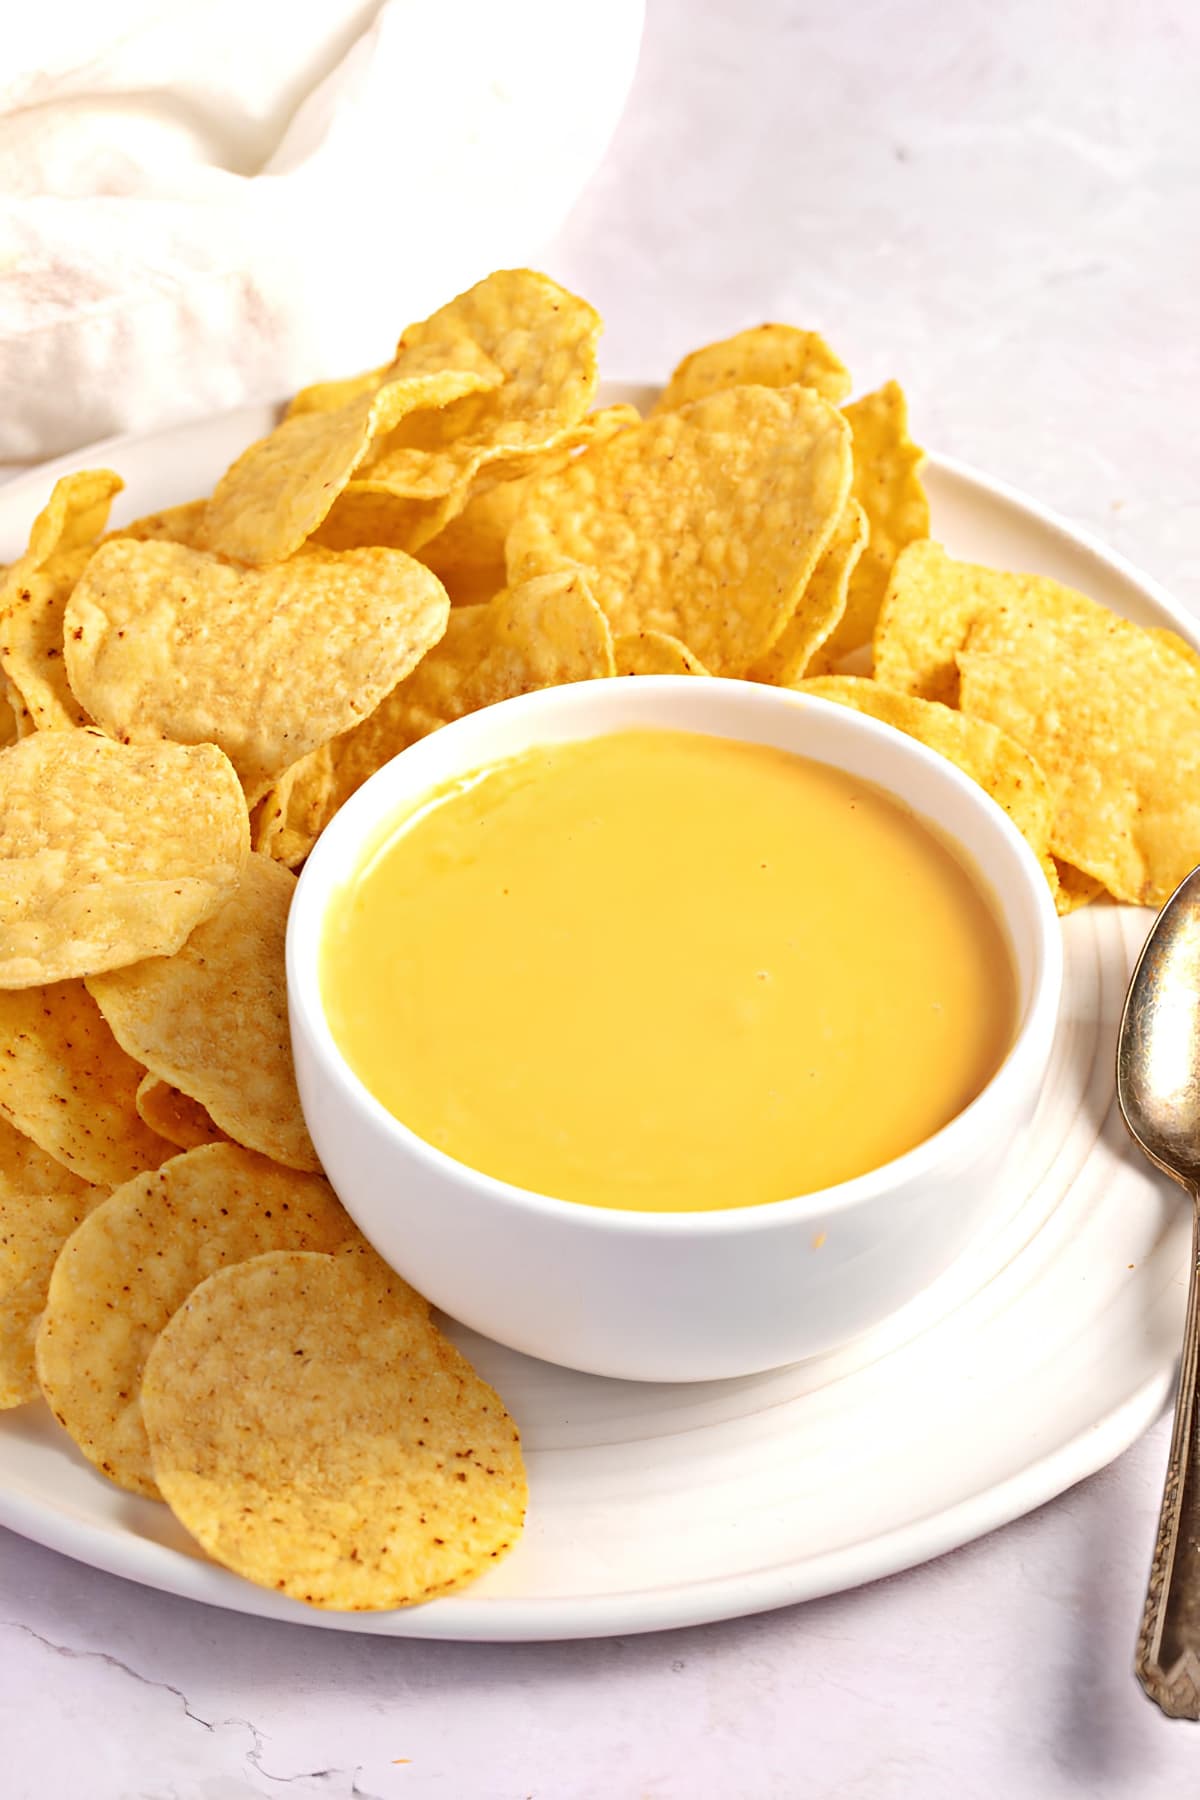 Appetizing Nacho Cheese Sauce in a Bowl with Served with Crunchy Chips